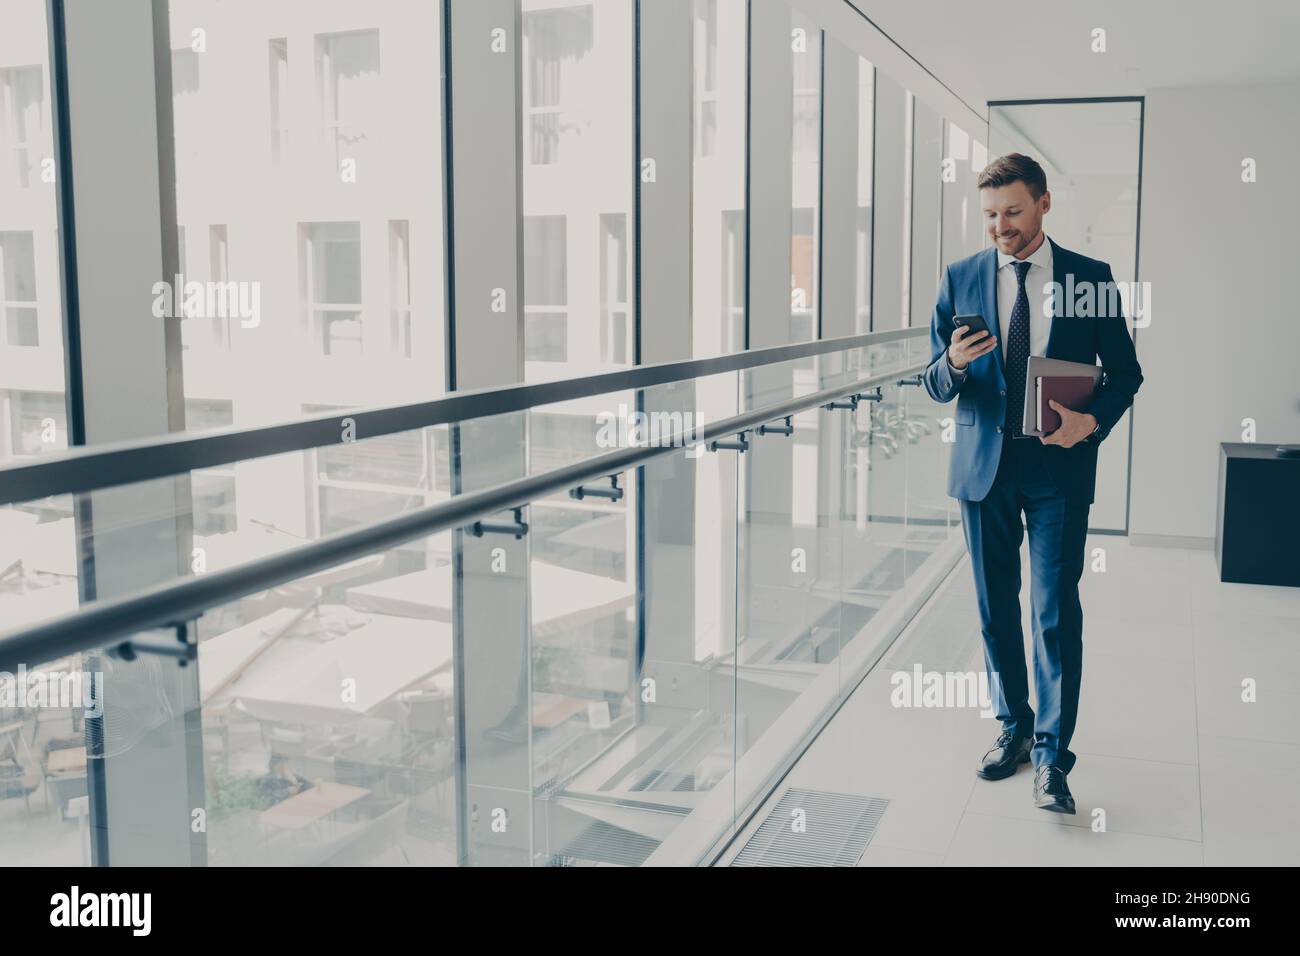 Smiling redhead man office worker in suit using cellphone while standing in modern office Stock Photo